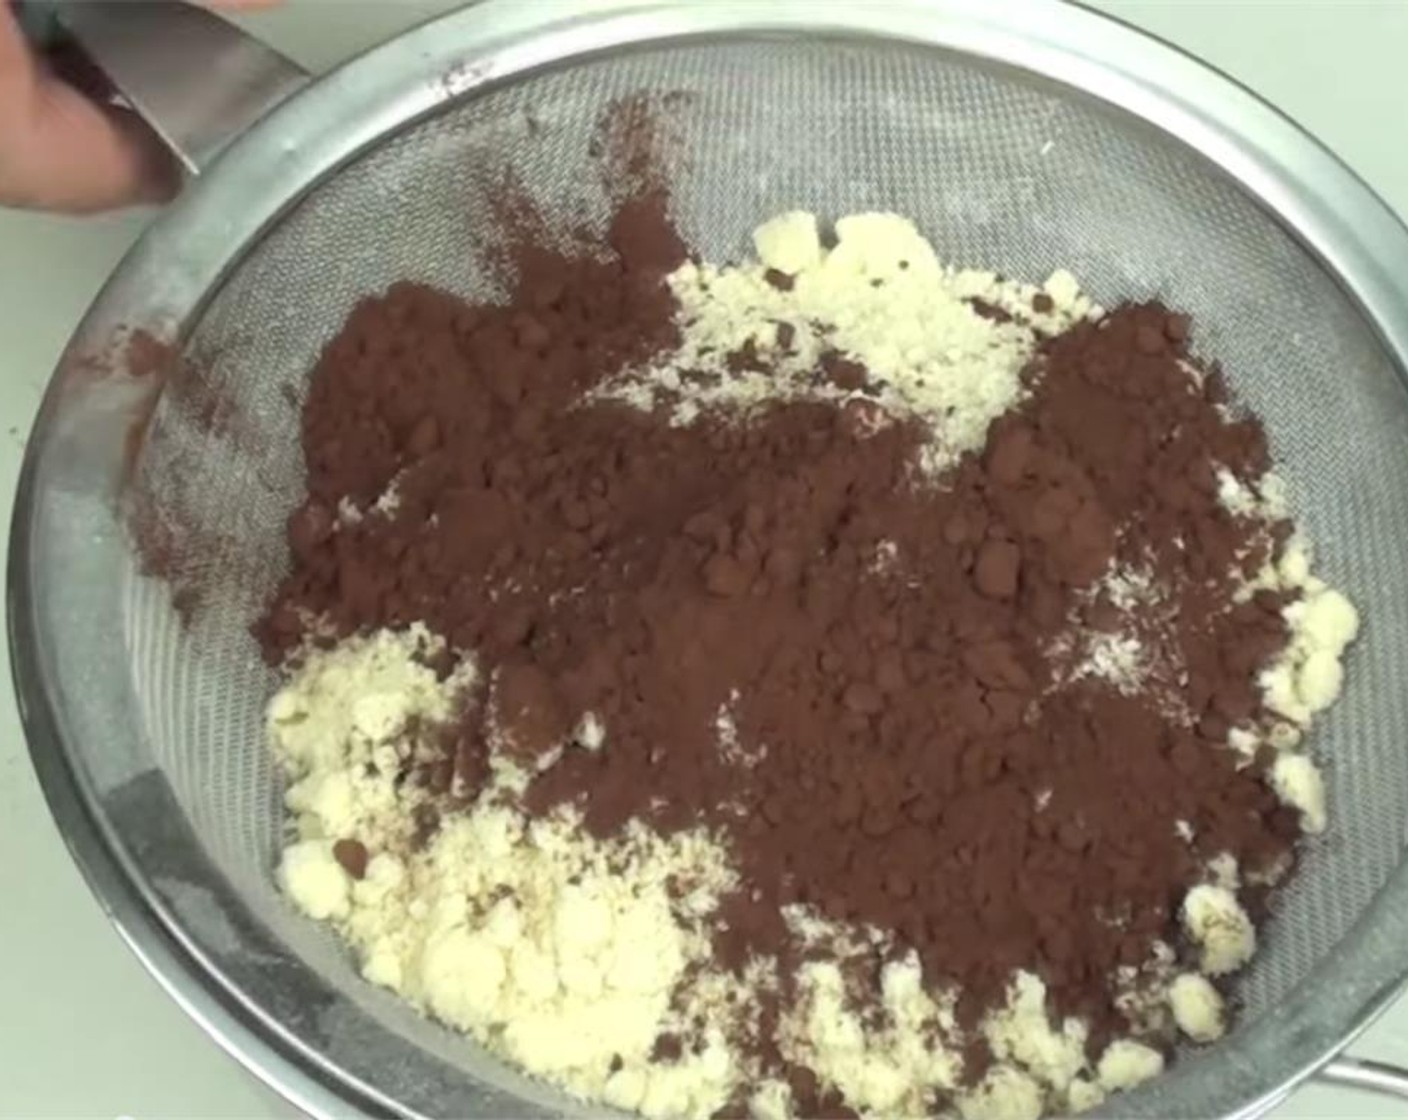 step 2 Sift together Powdered Confectioners Sugar (1 3/4 cups), Almond Meal (1 cup), and Dark Cocoa Powder (2 Tbsp) in a large bowl. Stir to combine.